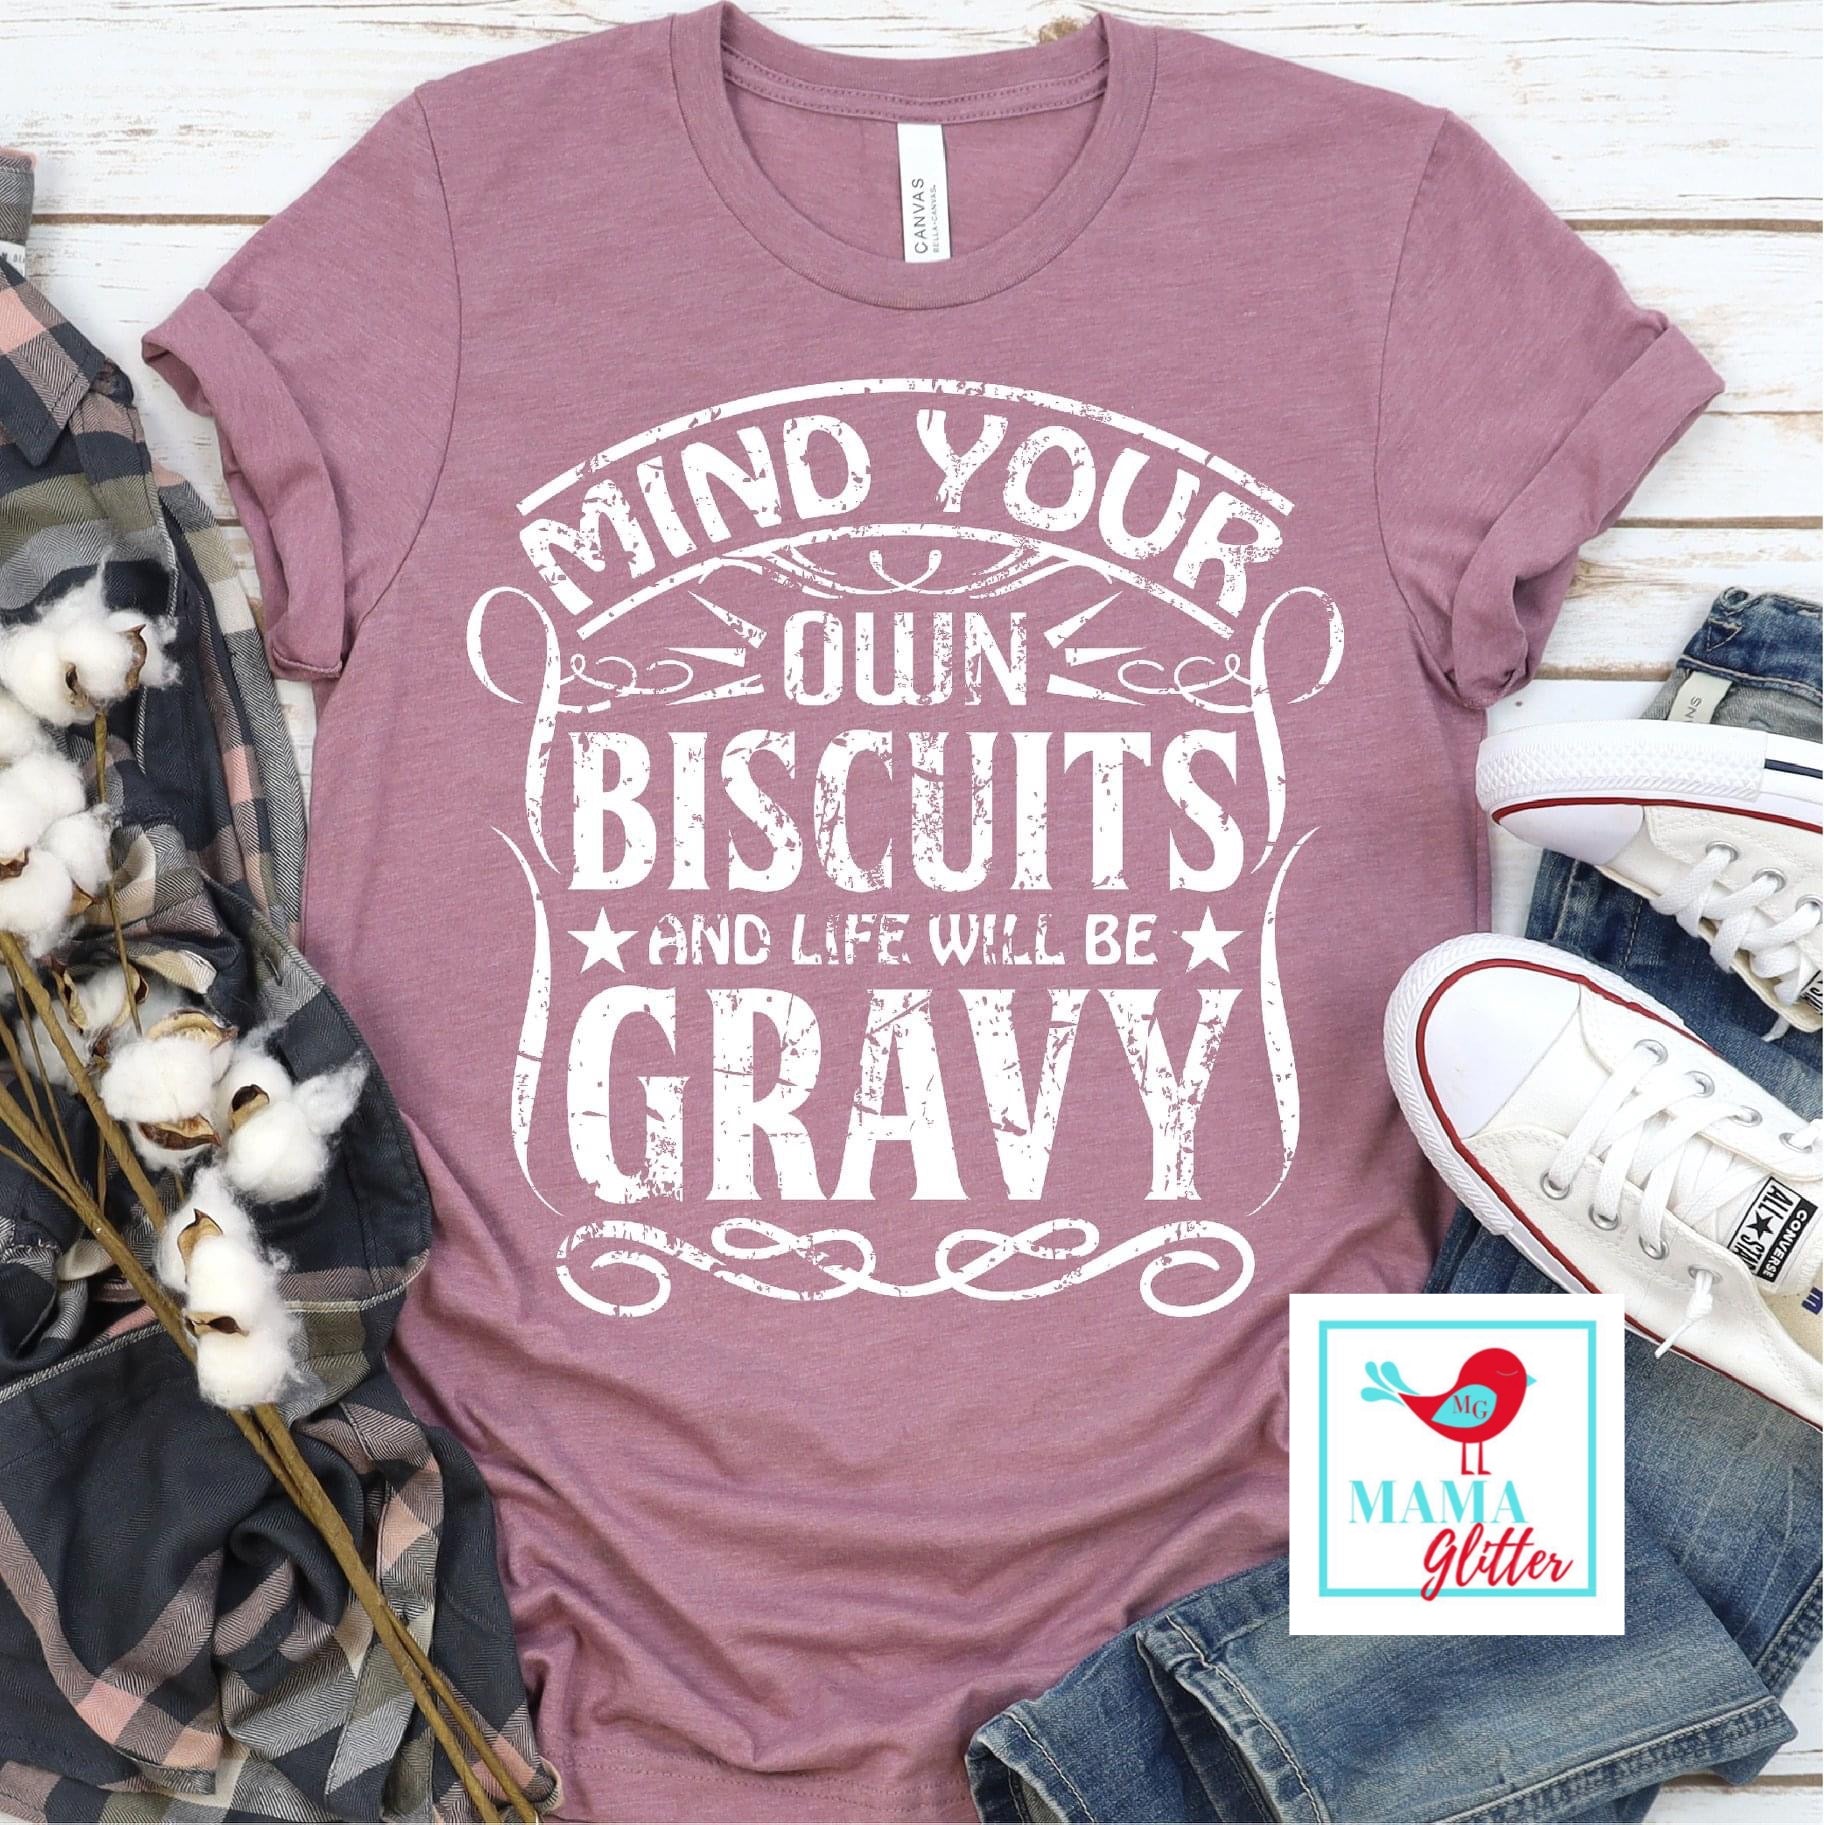 MIND YOUR OWN BISCUITS